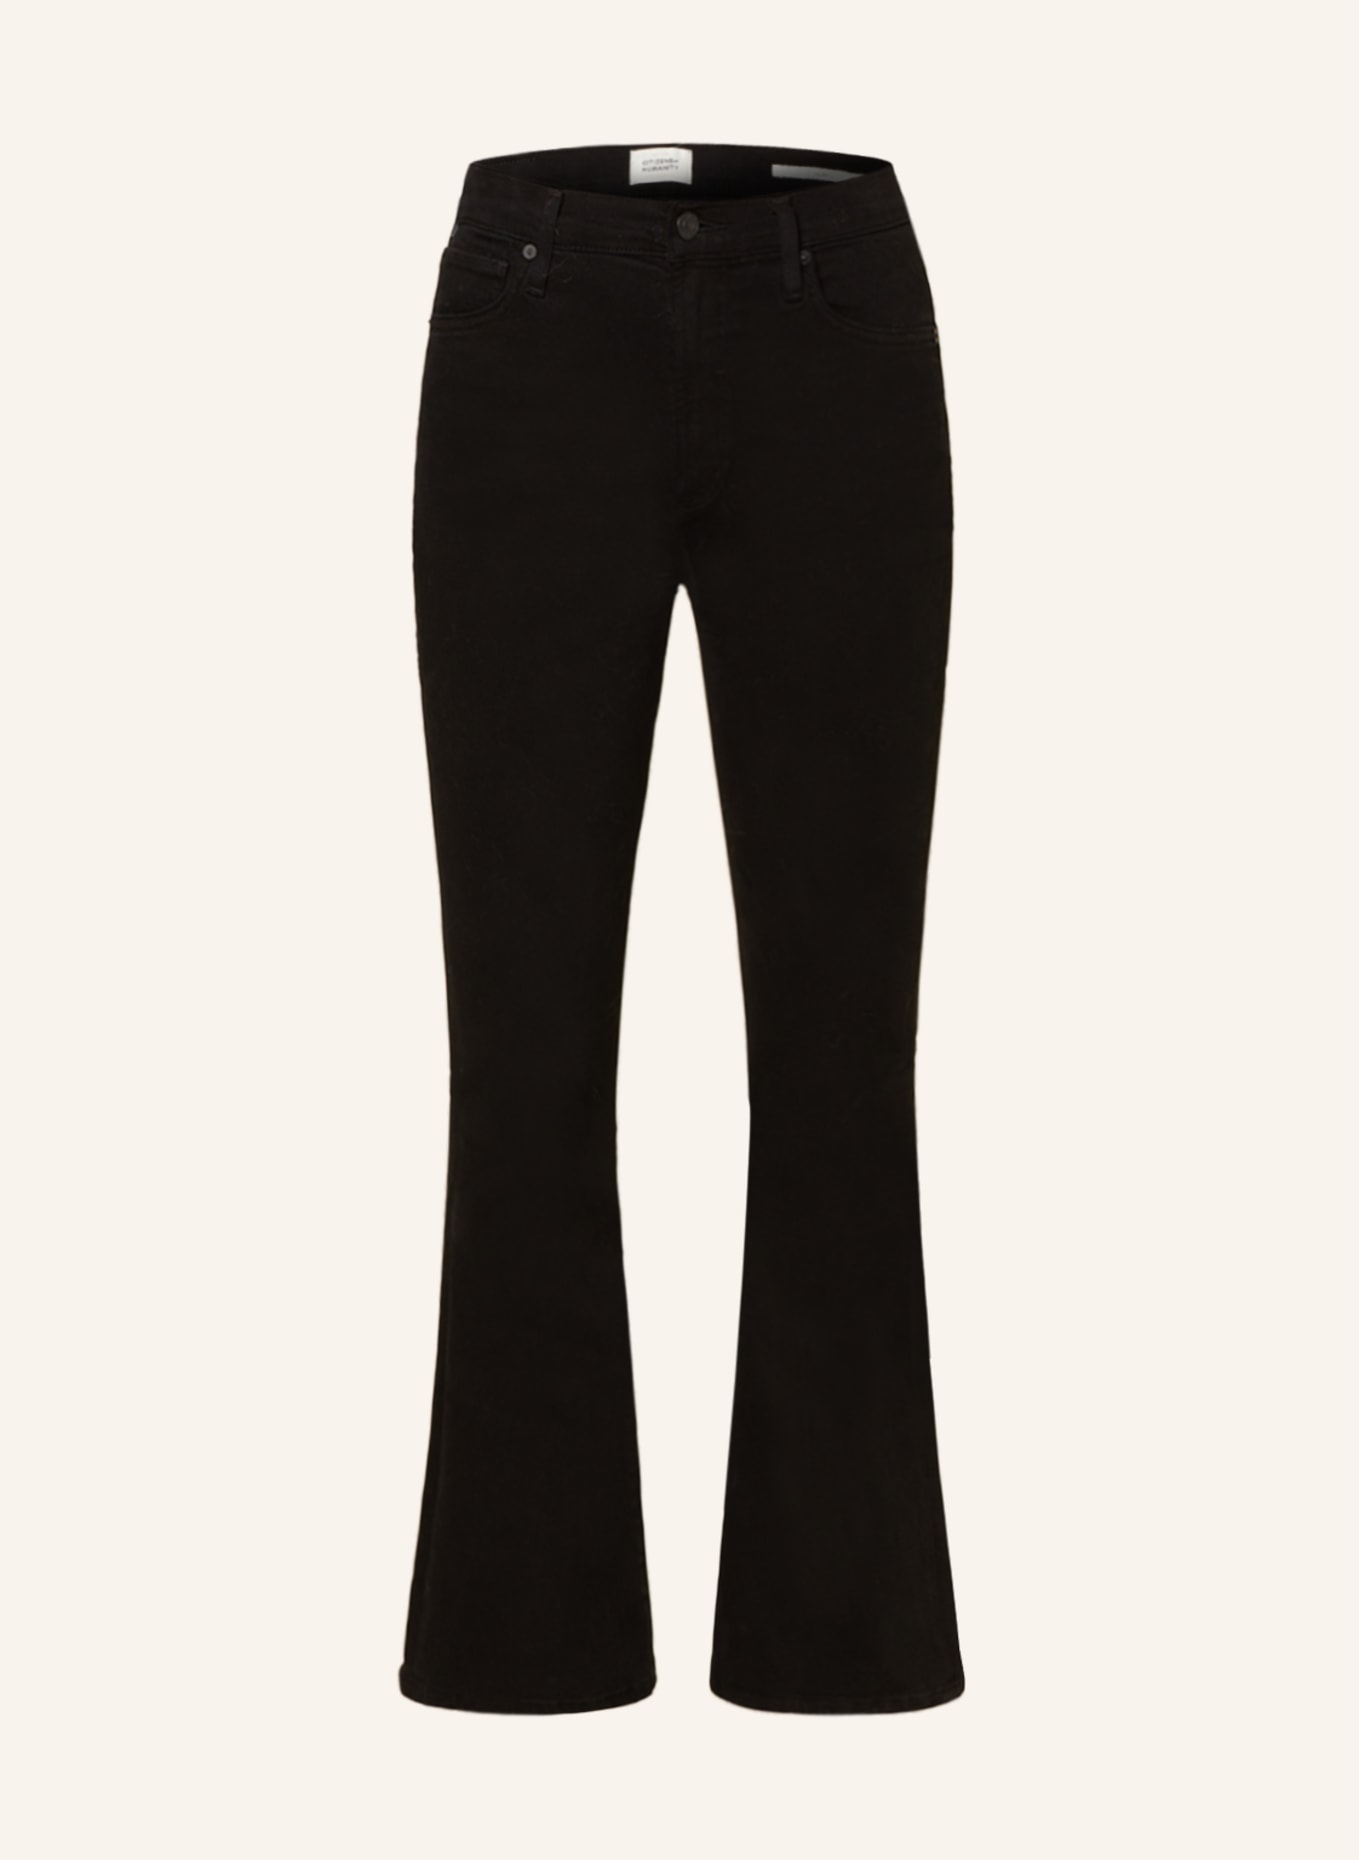 CITIZENS of HUMANITY Bootcut Jeans LILAH, Farbe: SCHWARZ (Bild 1)